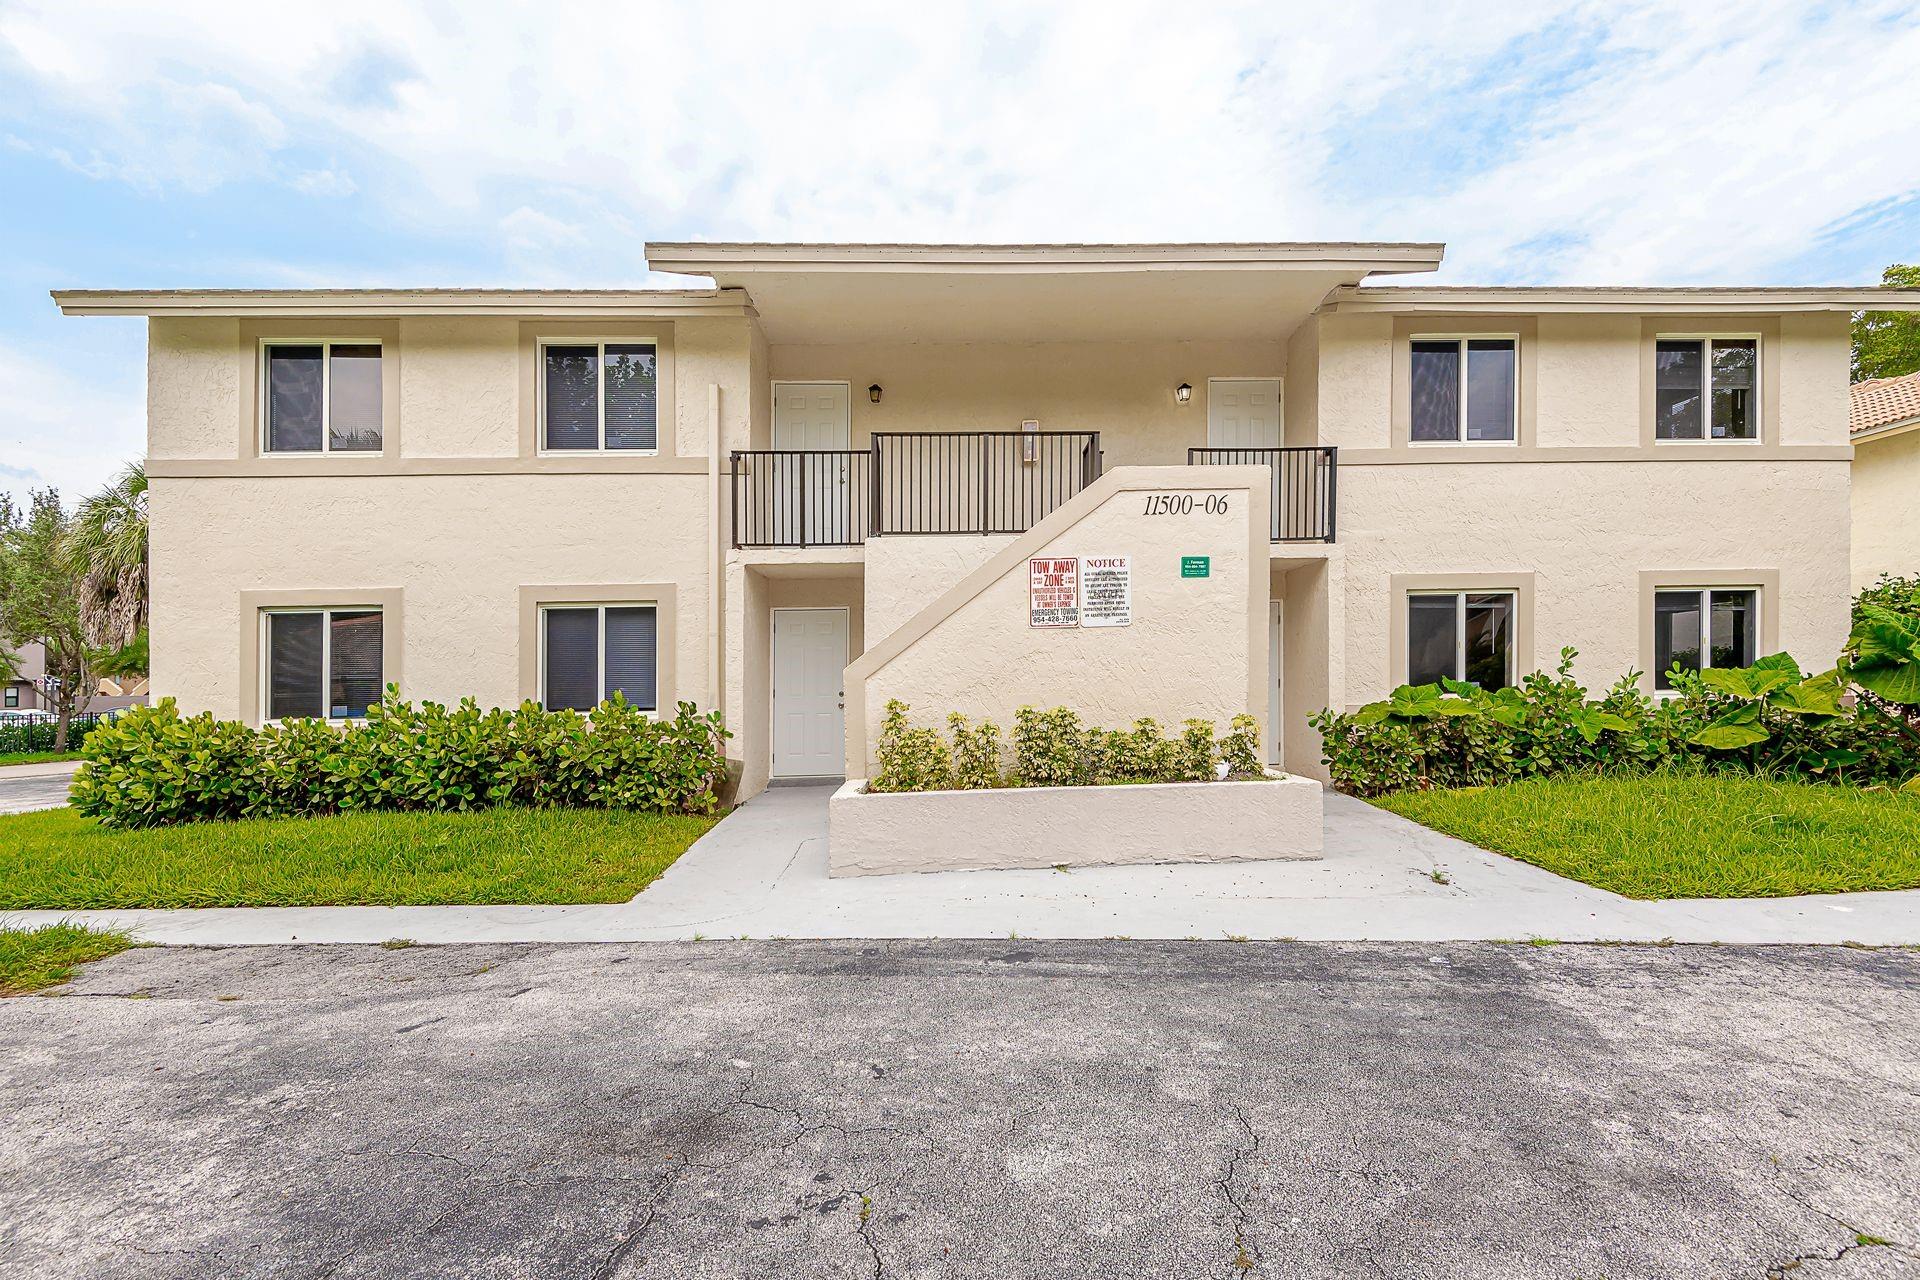 11500-11506 NW 43RD CT, Coral Springs, FL 33065